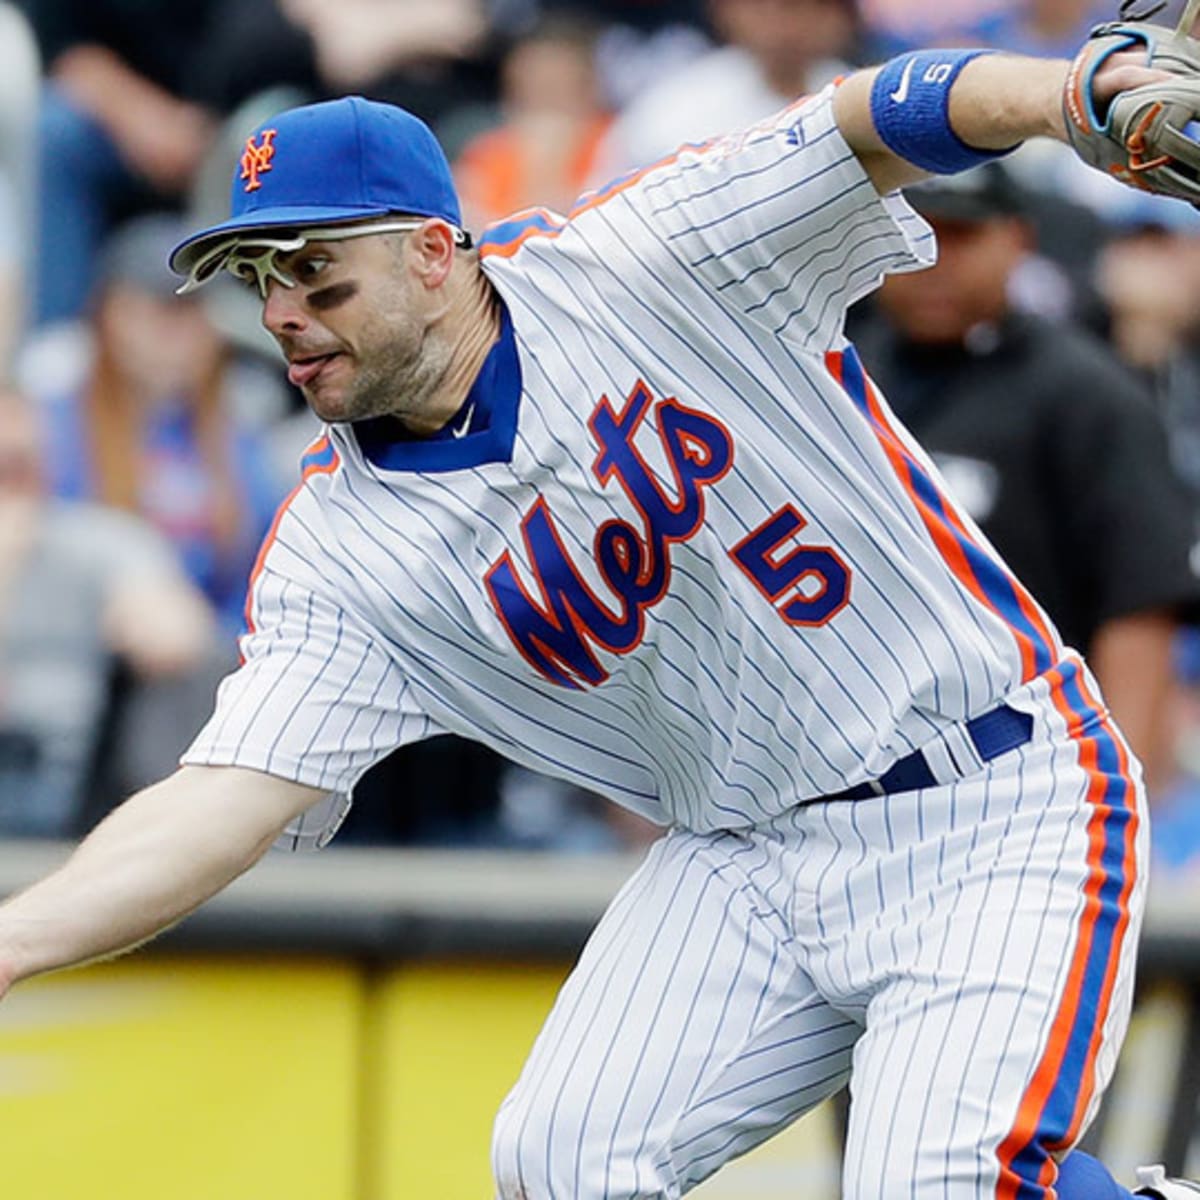 After Neck Surgery, Mets' David Wright Expects to Return 'as Good as New' -  The New York Times